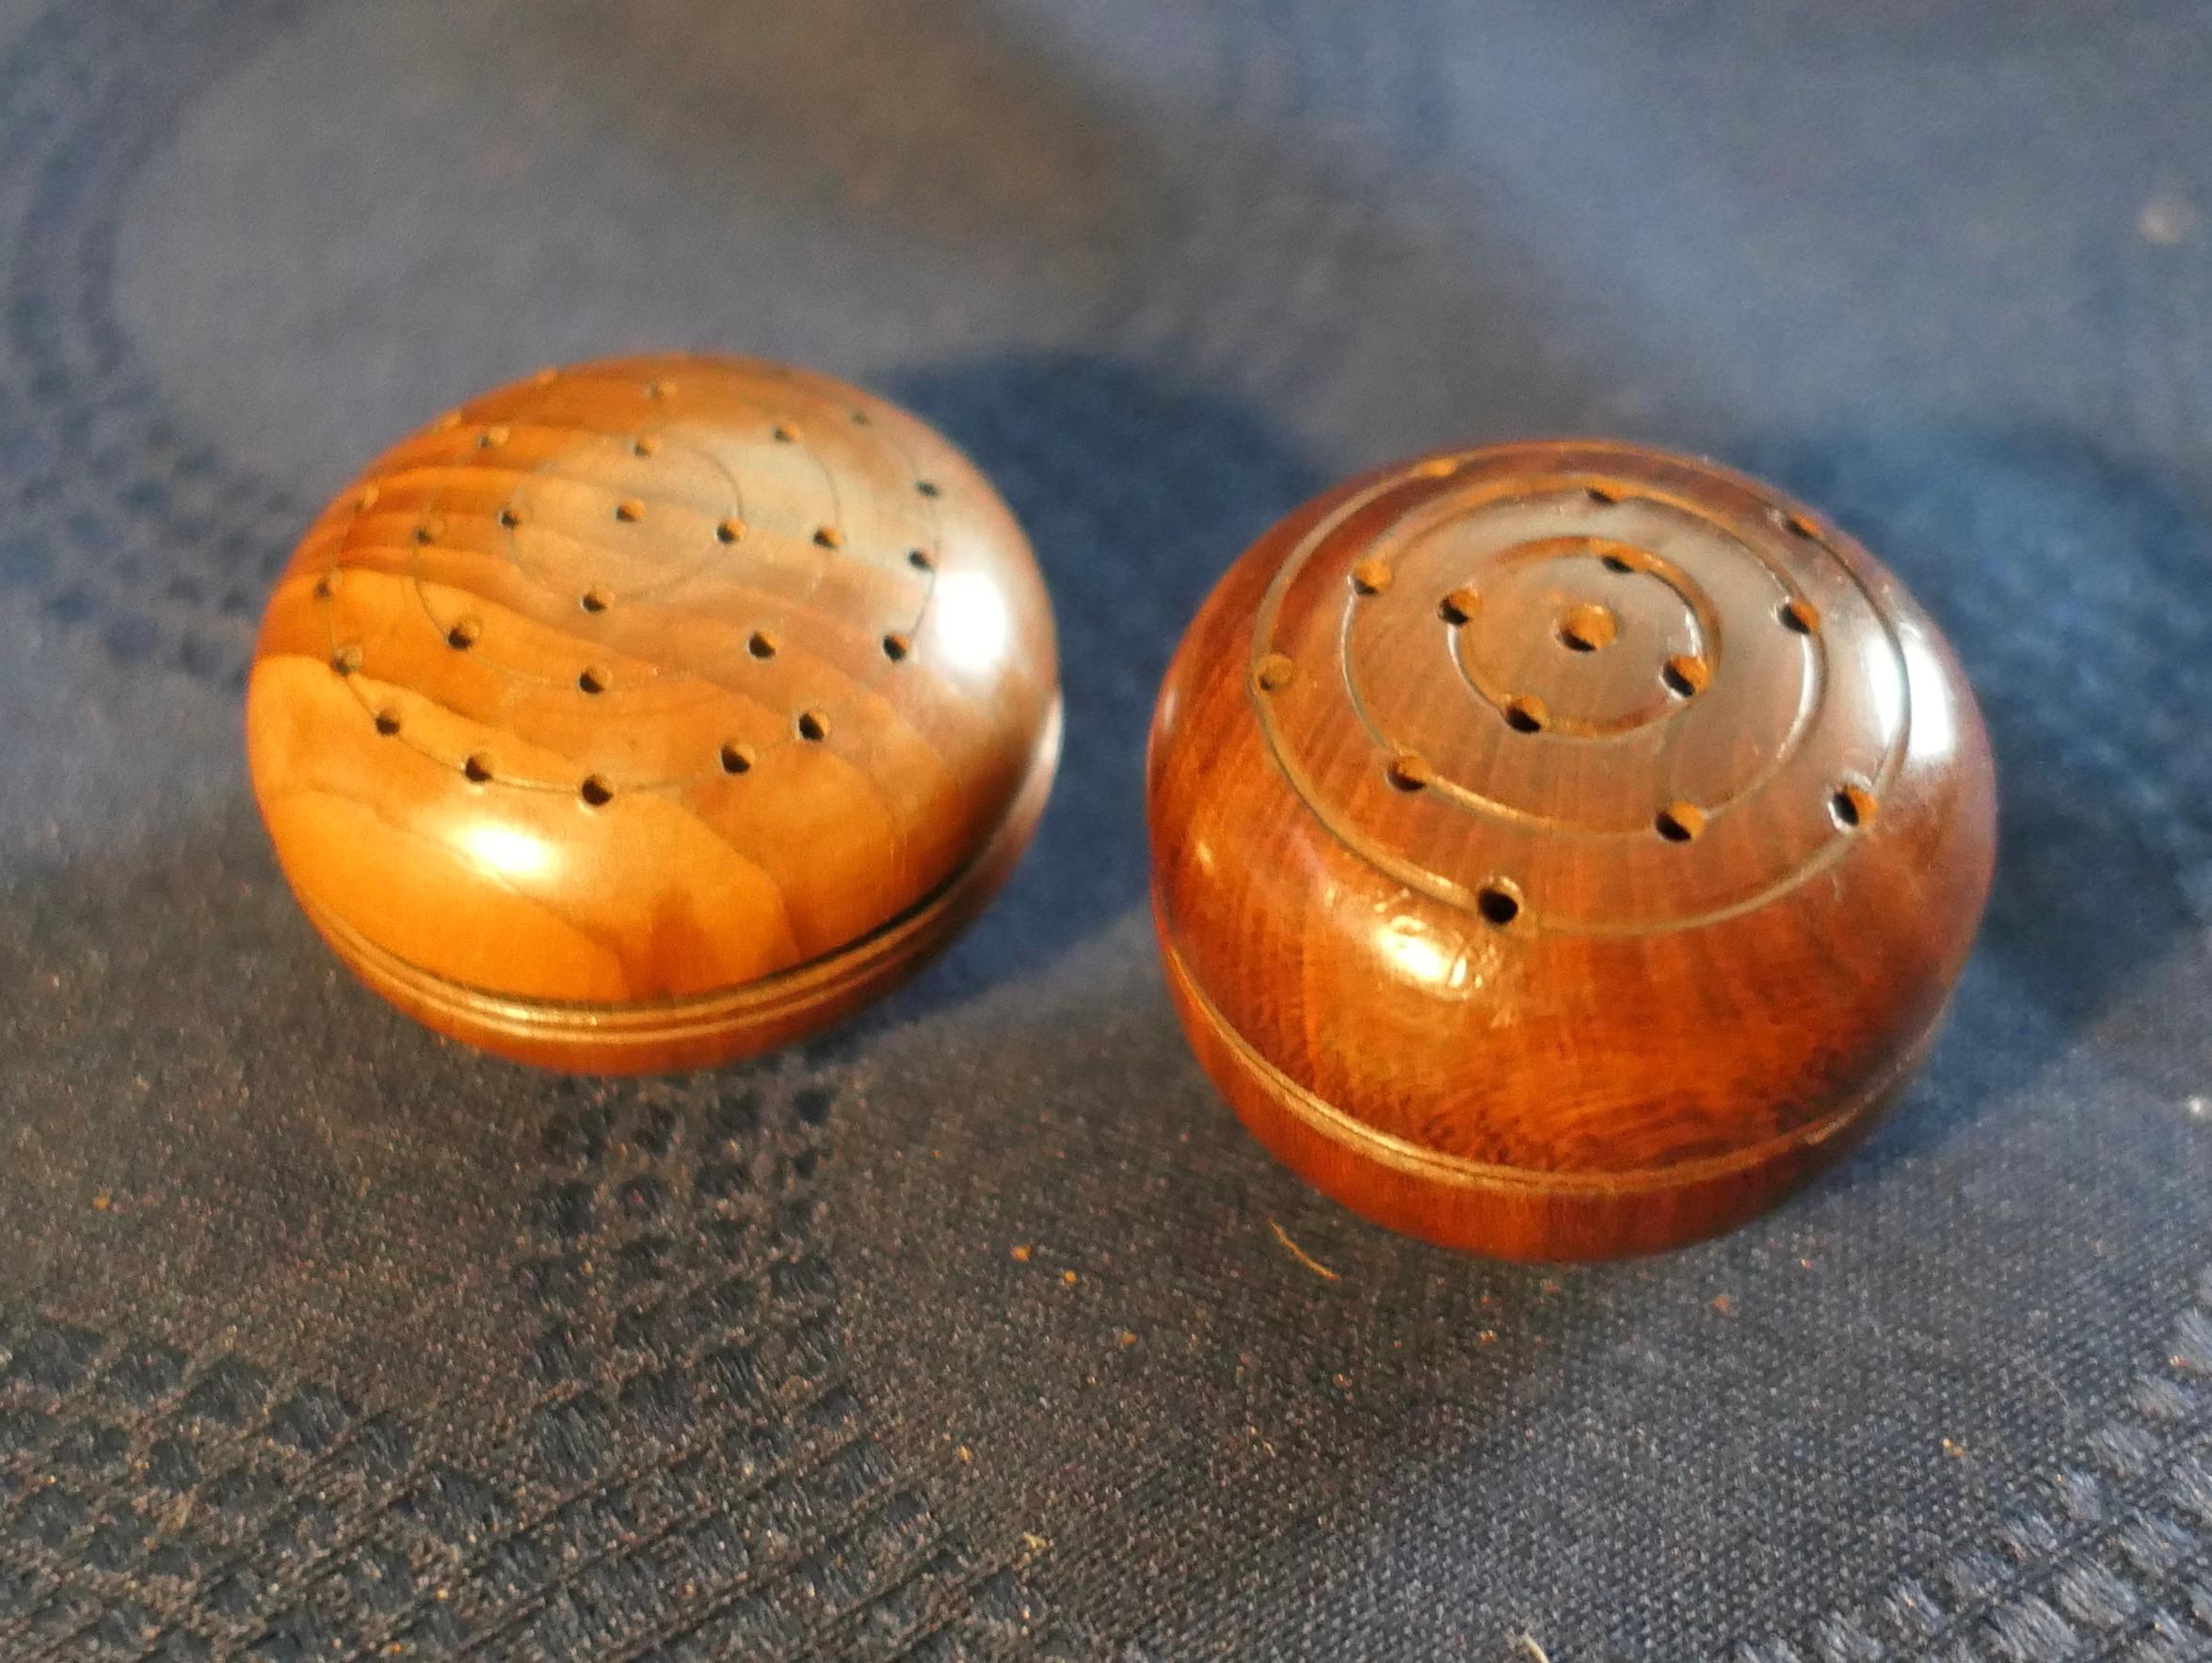 A Set of 2 Treen Pomanders in Yew Wood

2 small round early 19th century yew wood lady's pomanders, these unscrew in the centre with scent holes to both sides. one of these has what seems to be the original scent sponge, past its best now but